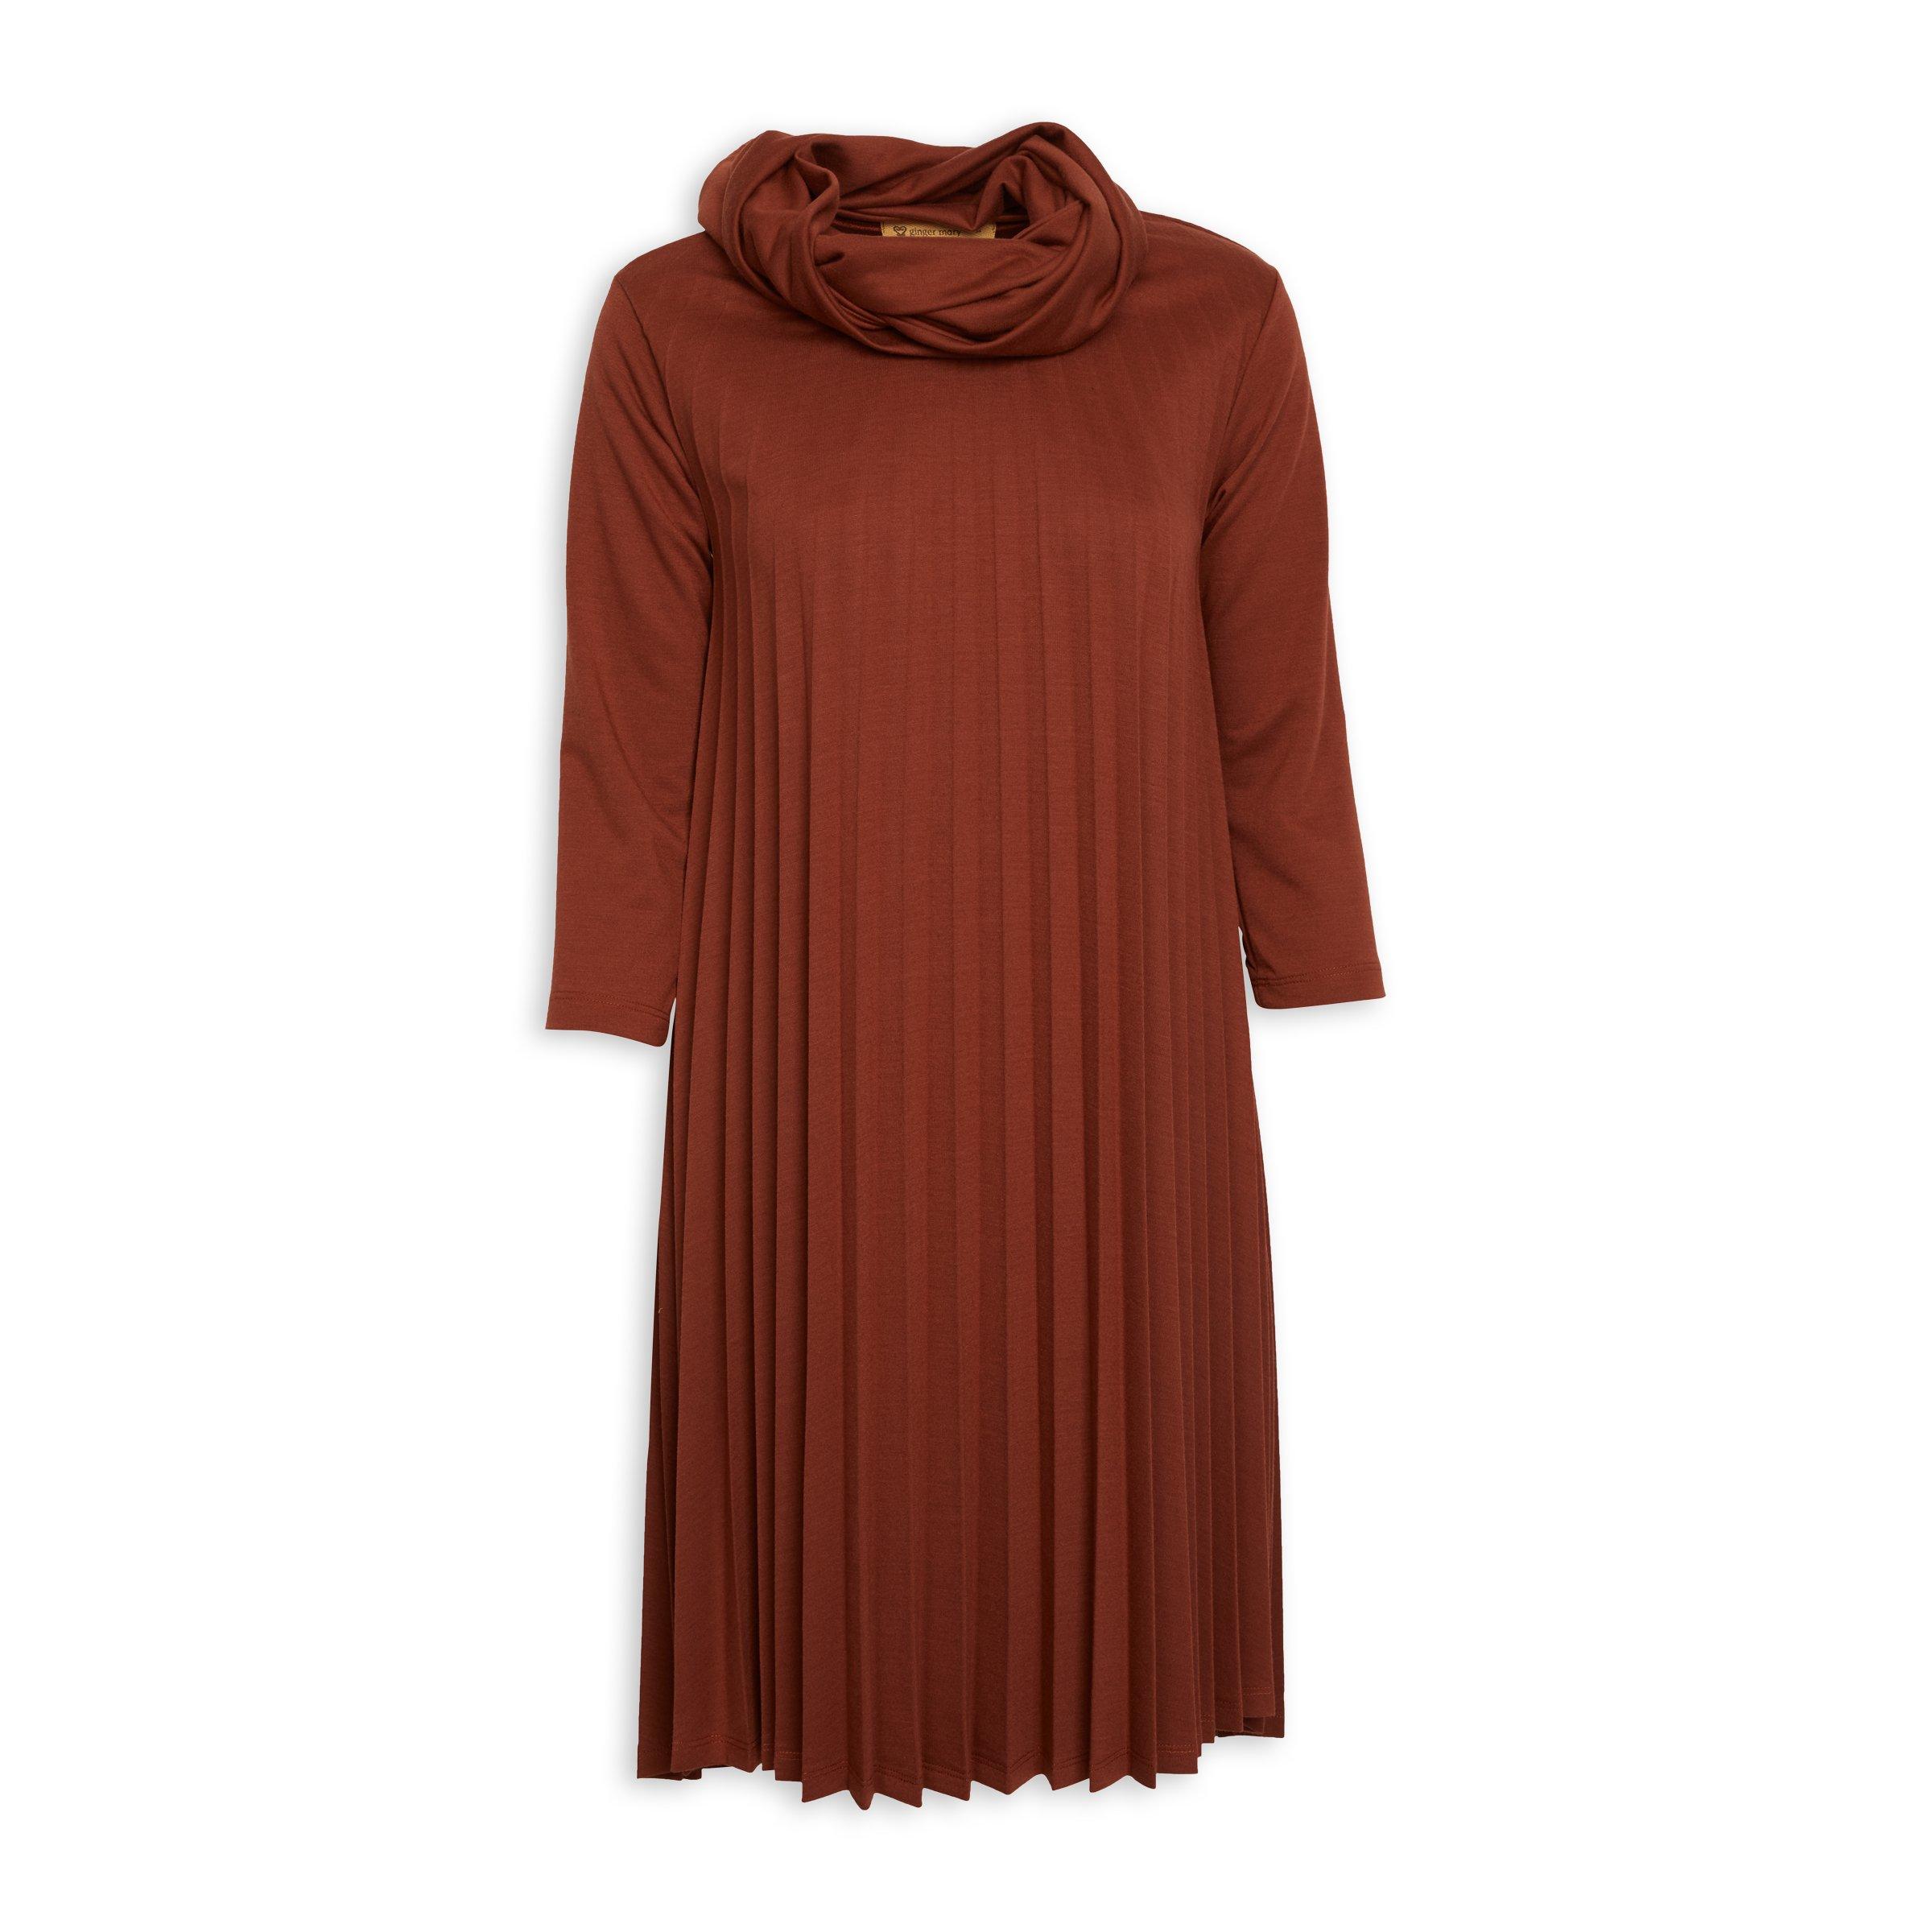 Buy Ginger Mary Rust Dress With Snood Online | Truworths